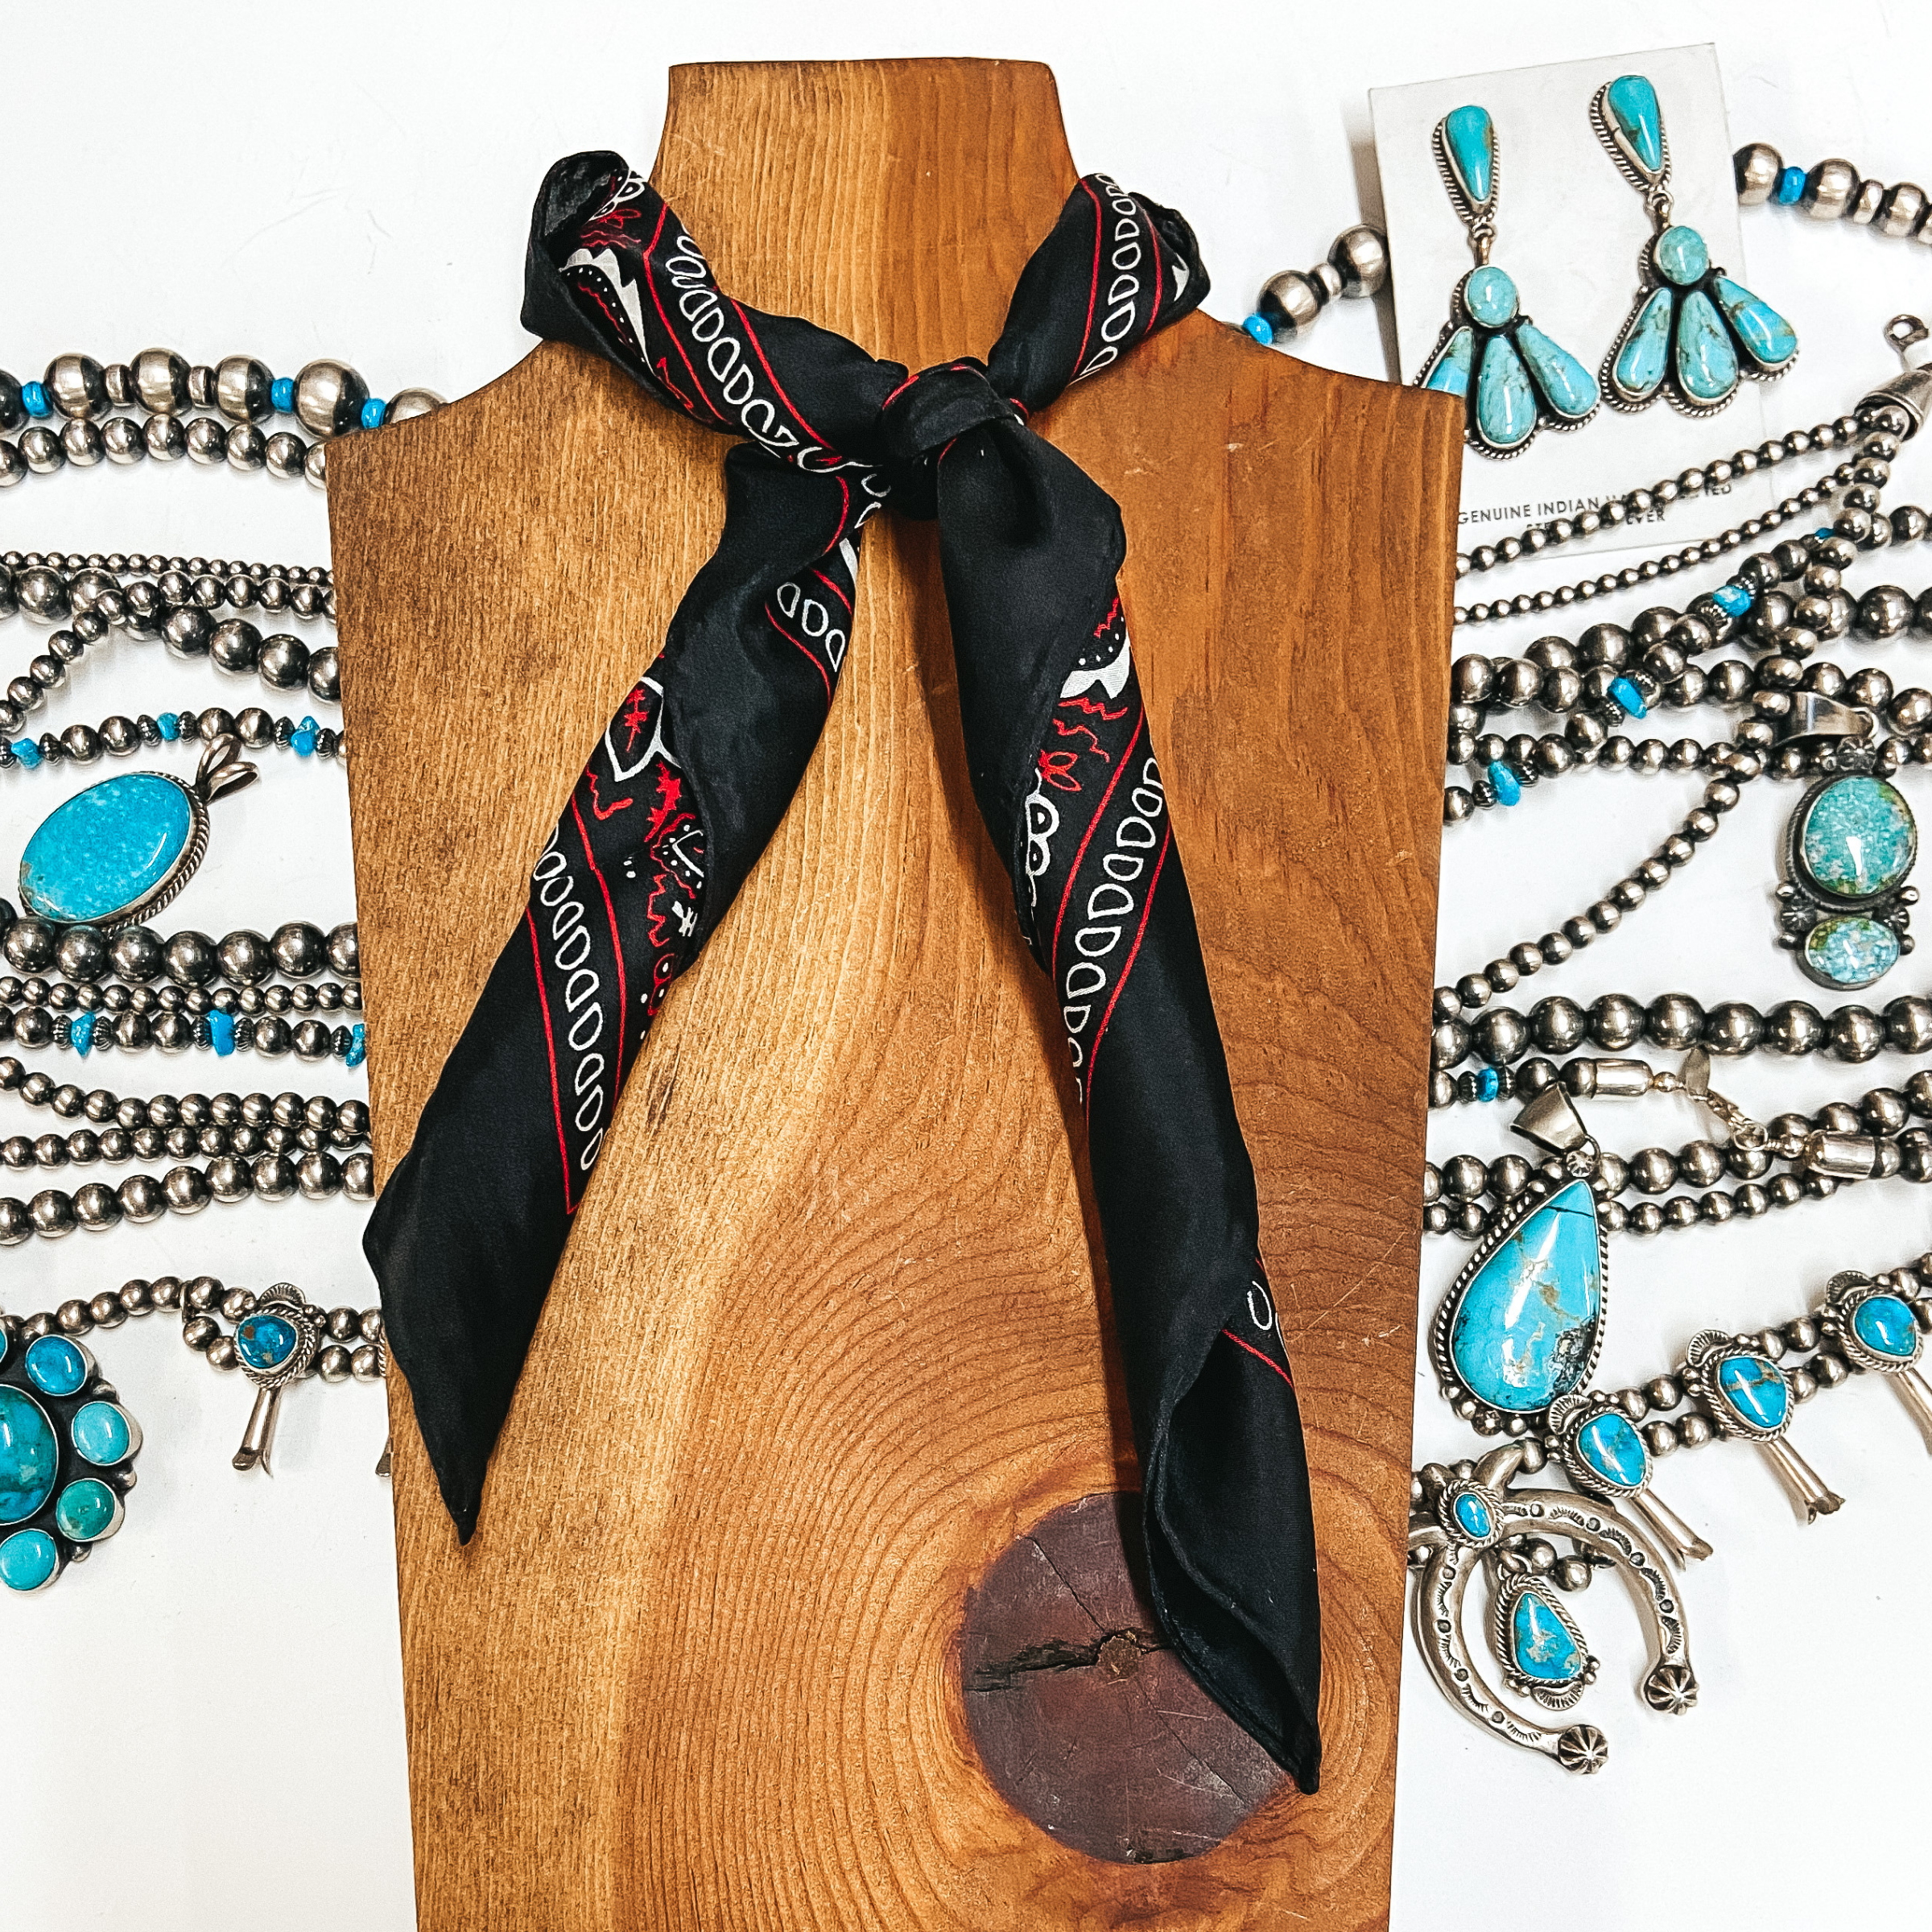 A black silky wild rag with red and white bandana print tied around a wooden display. Pictured on white background with silver and turquoise jewelry.